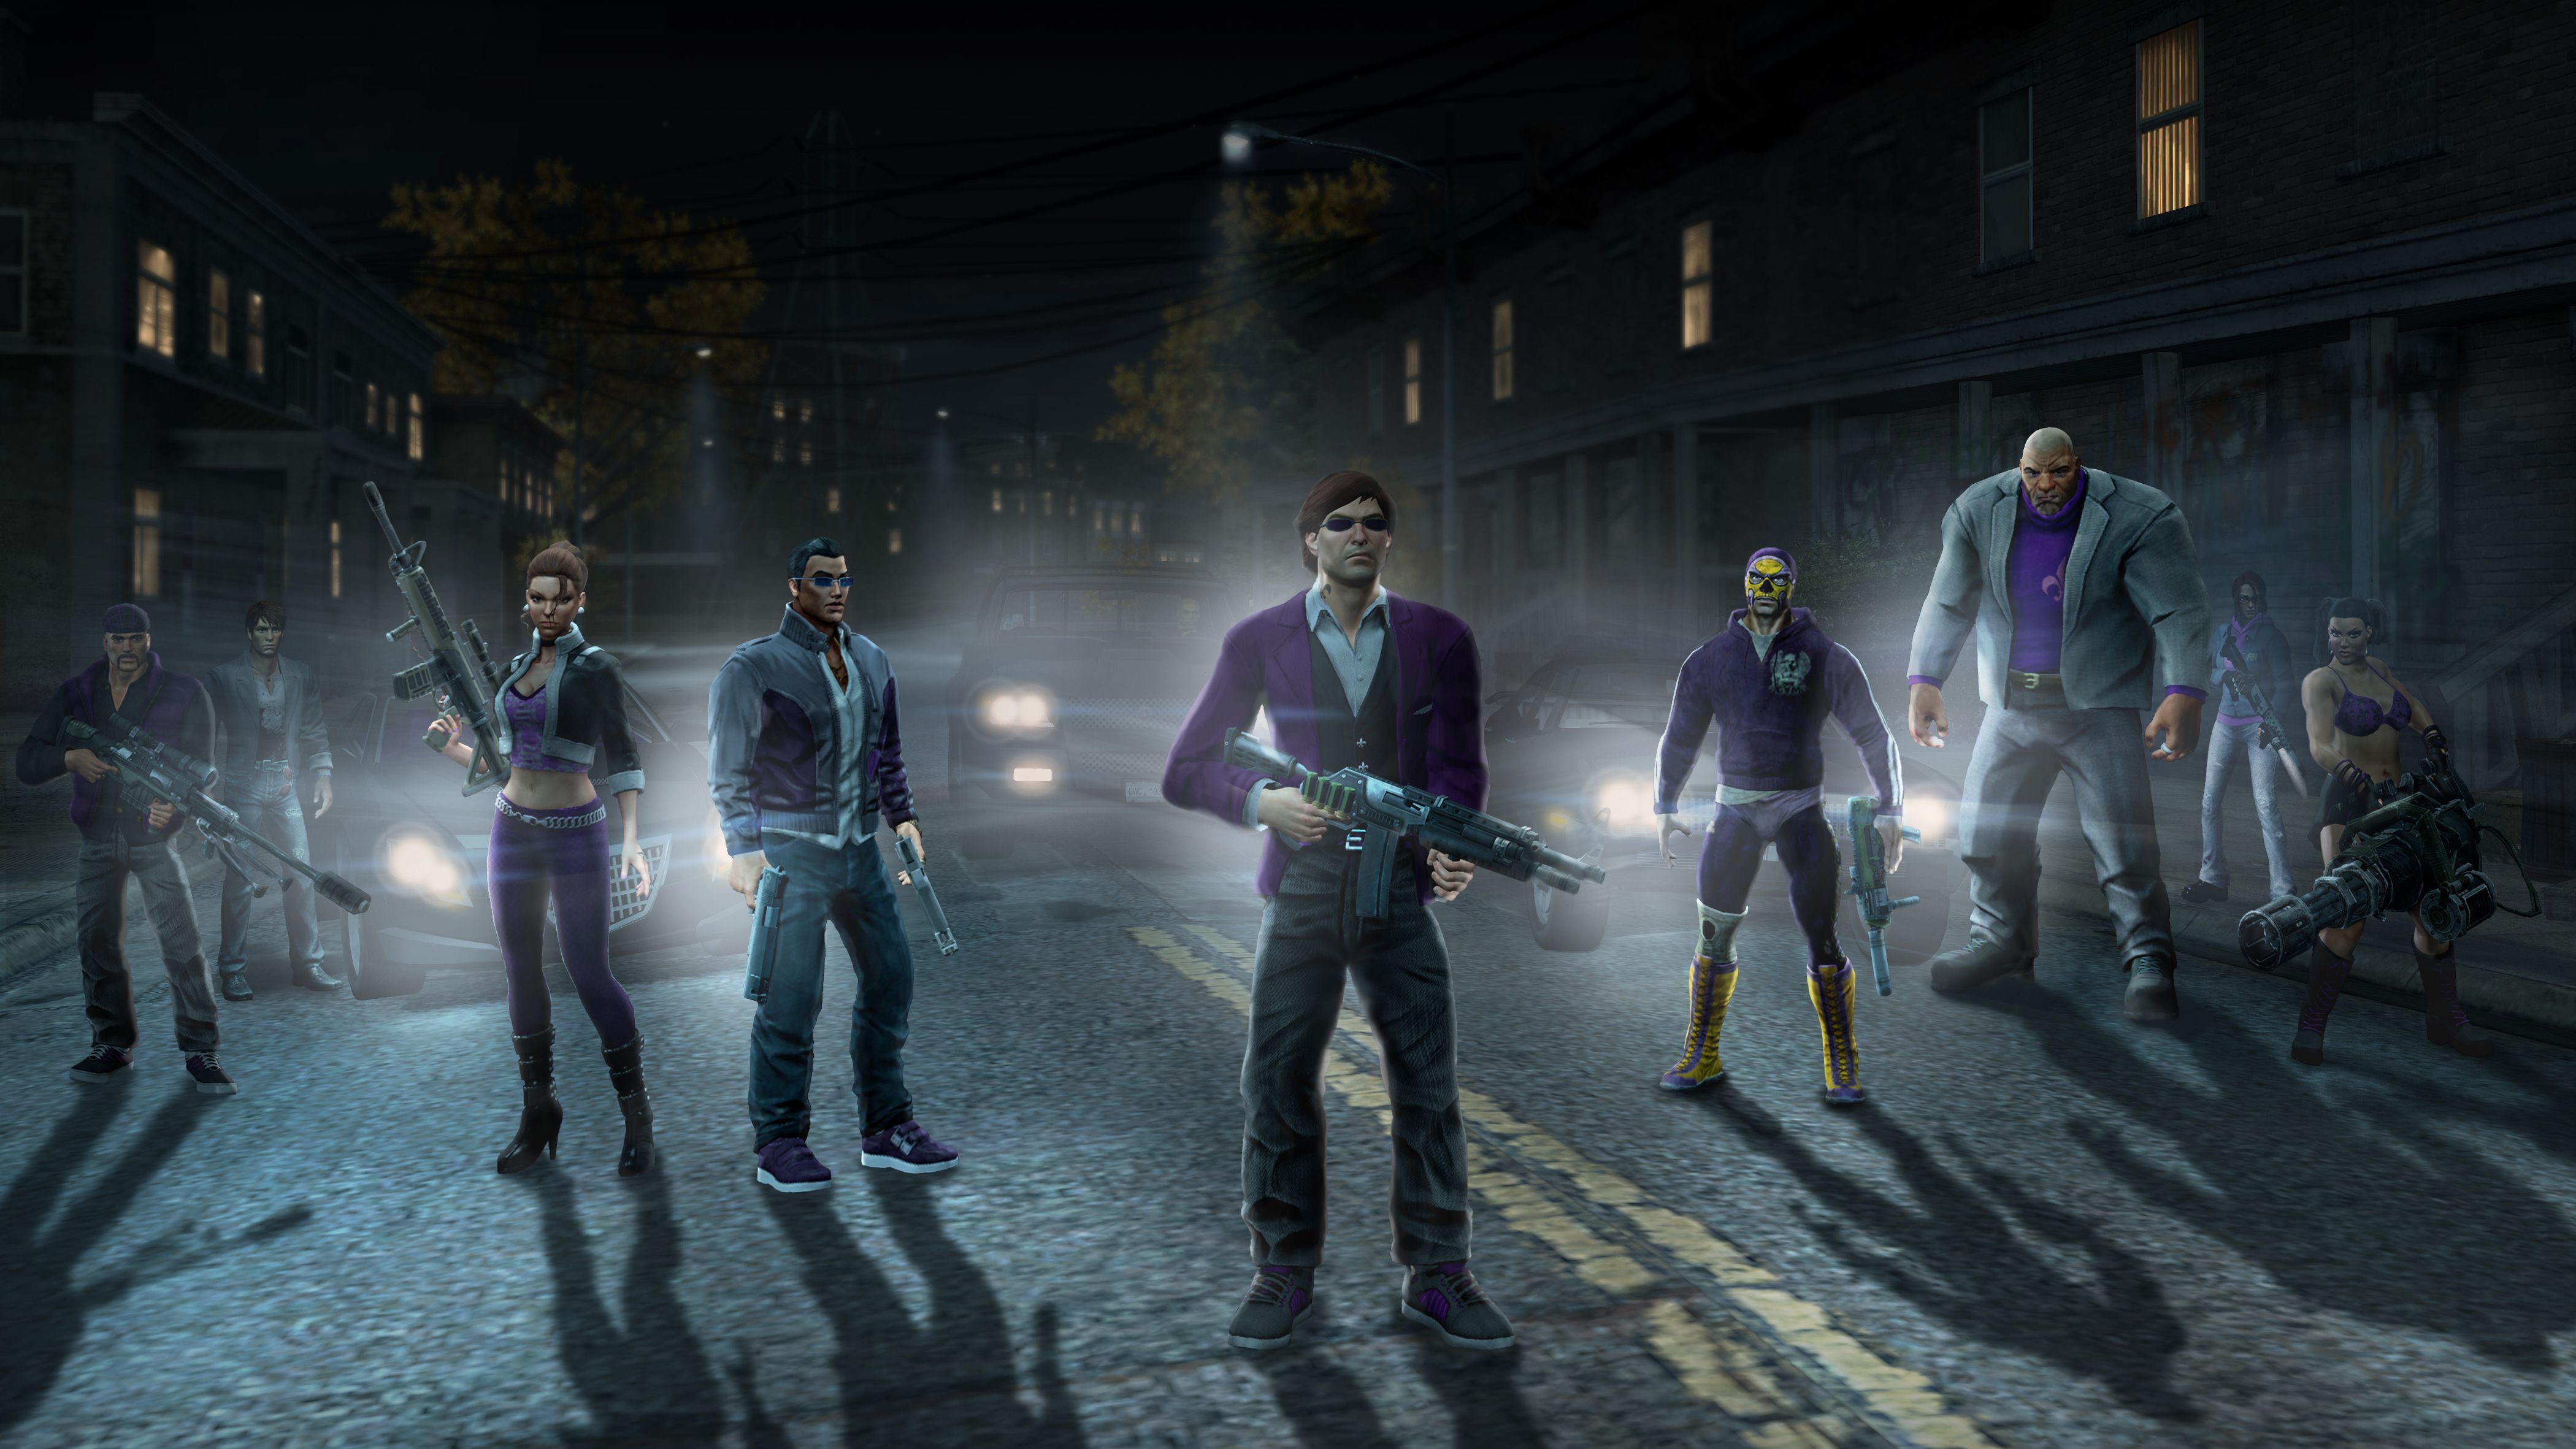 saints row 3 remastered download free